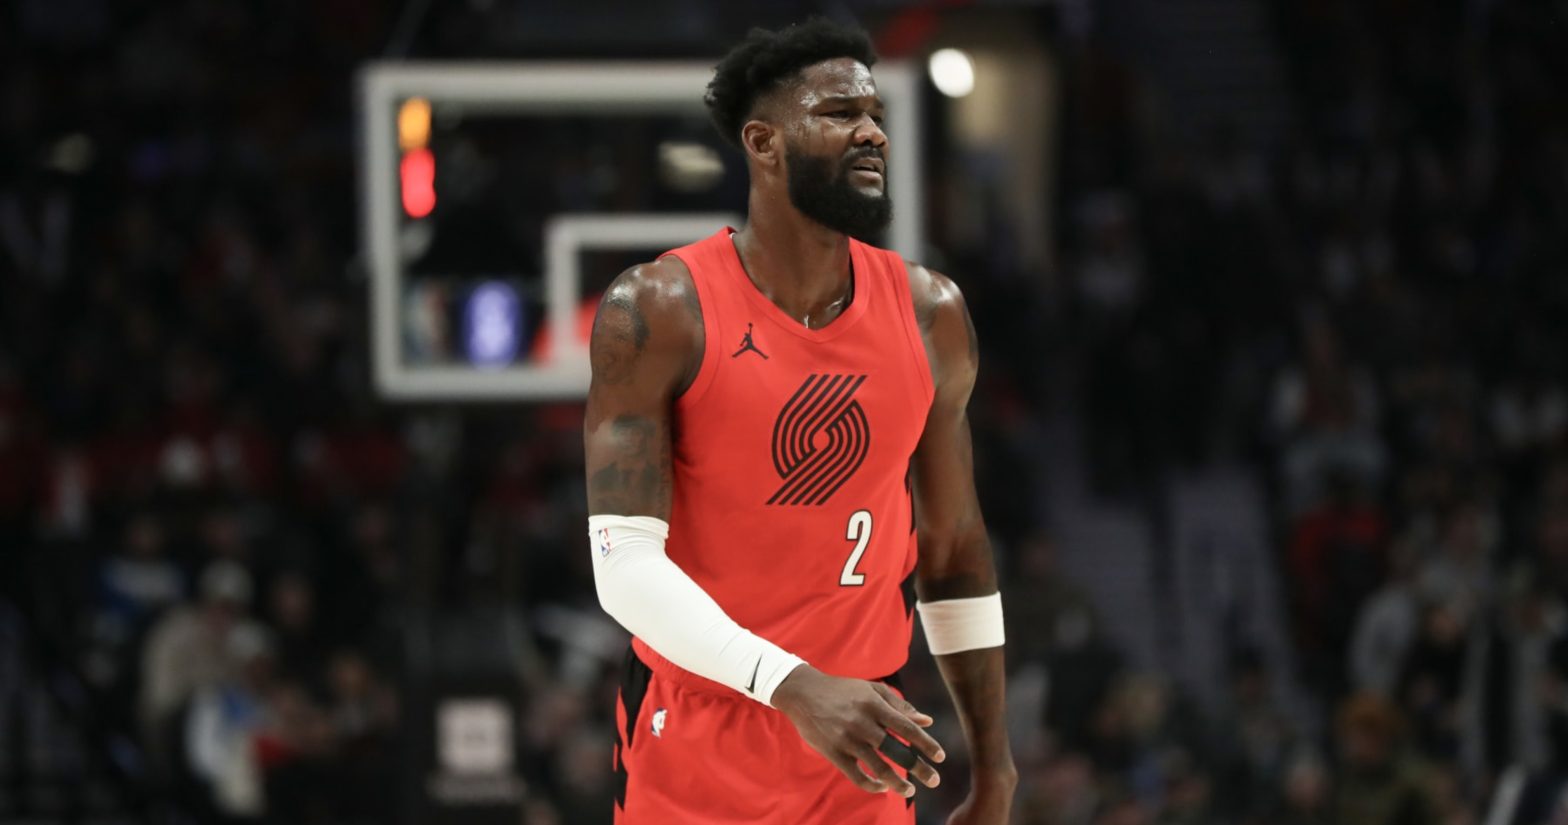 Blazers’ Deandre Ayton Out vs. Nets After Ice Prevents Him From Leaving Neighborhood